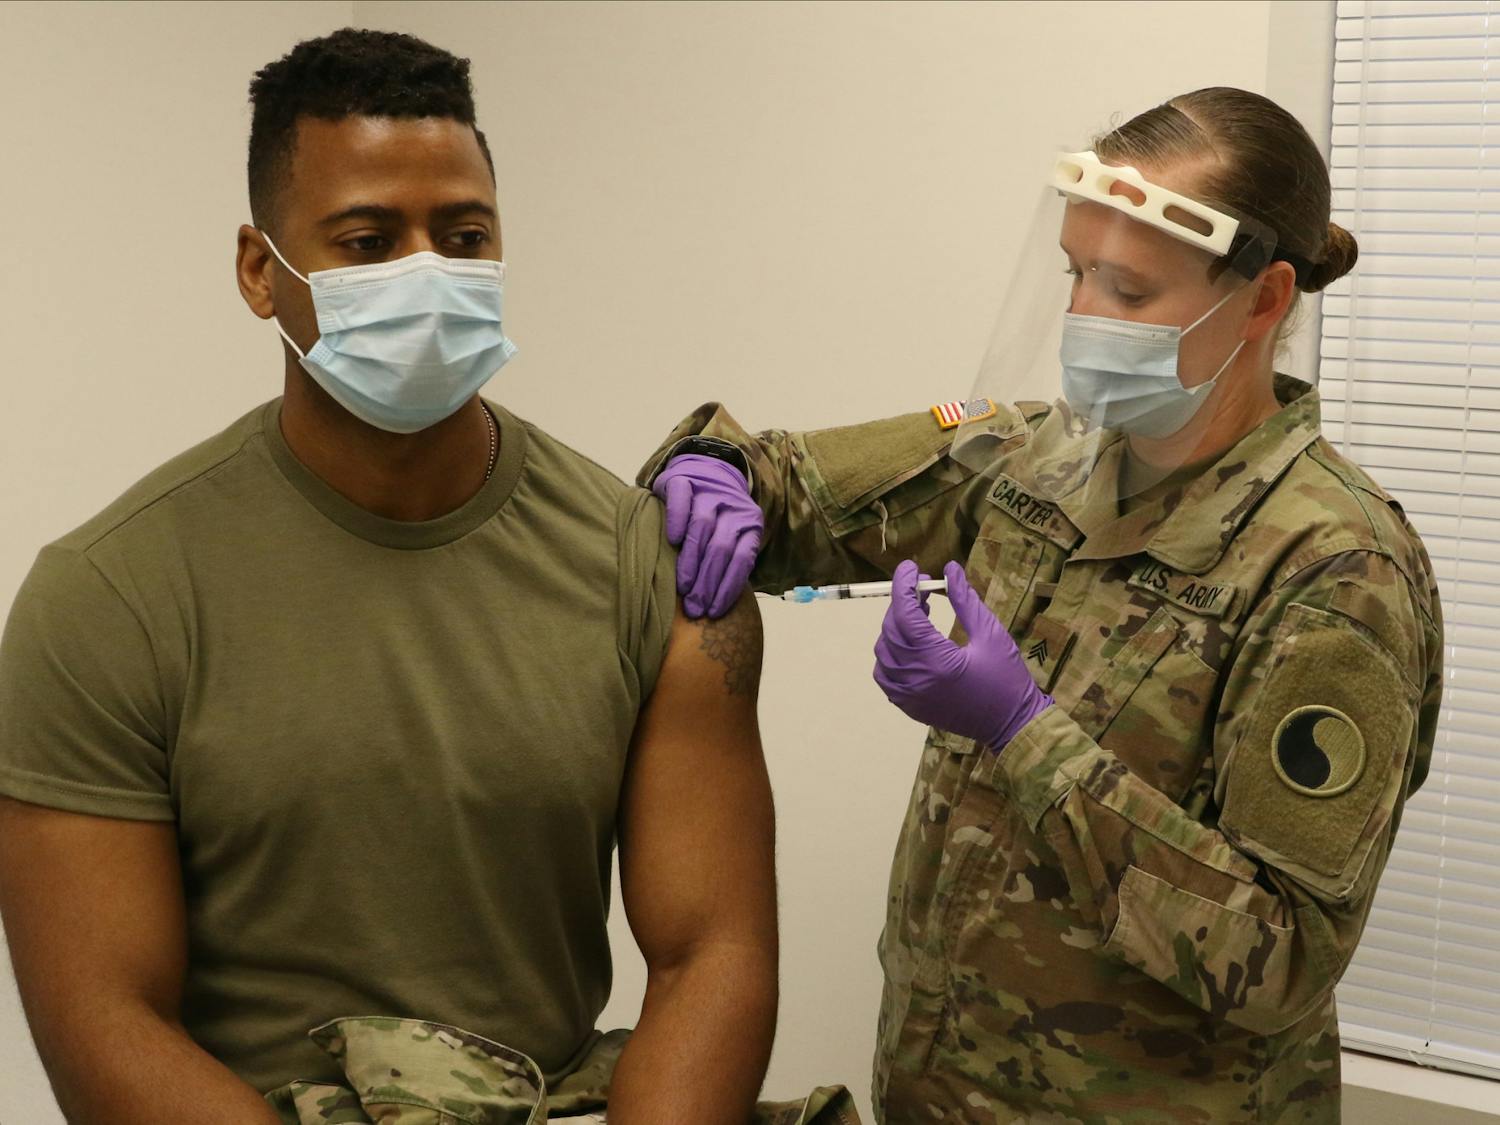 Although approximately 97% of soldiers in the Army are vaccinated, the majority of the remaining 3% are mixed with soldiers attempting to be exempt from the vaccine due to religious or medical reasons(Flickr/“Virginia National Guard” by The National Guard, Dec. 31, 2020).